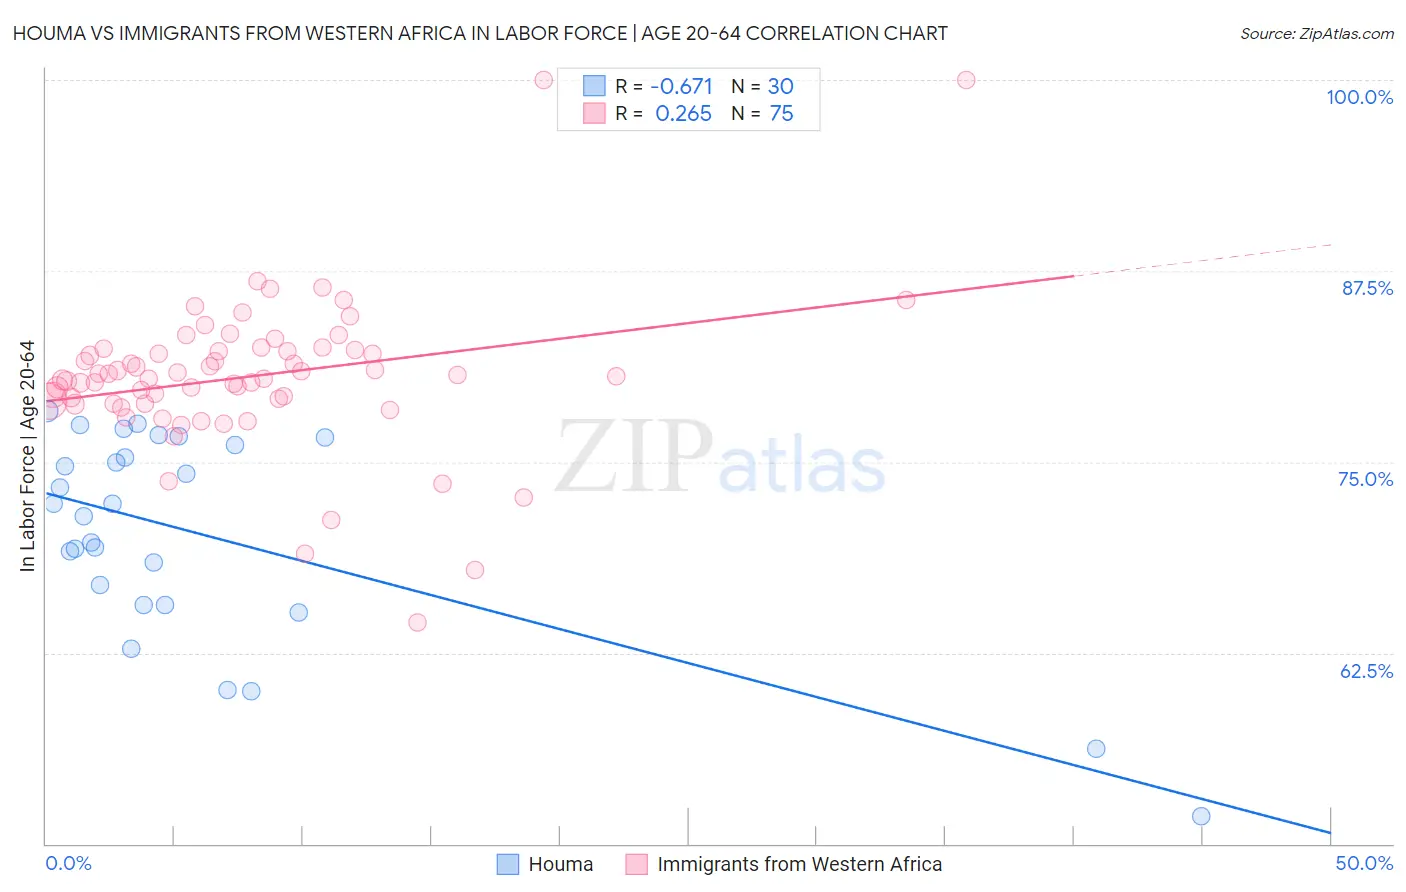 Houma vs Immigrants from Western Africa In Labor Force | Age 20-64